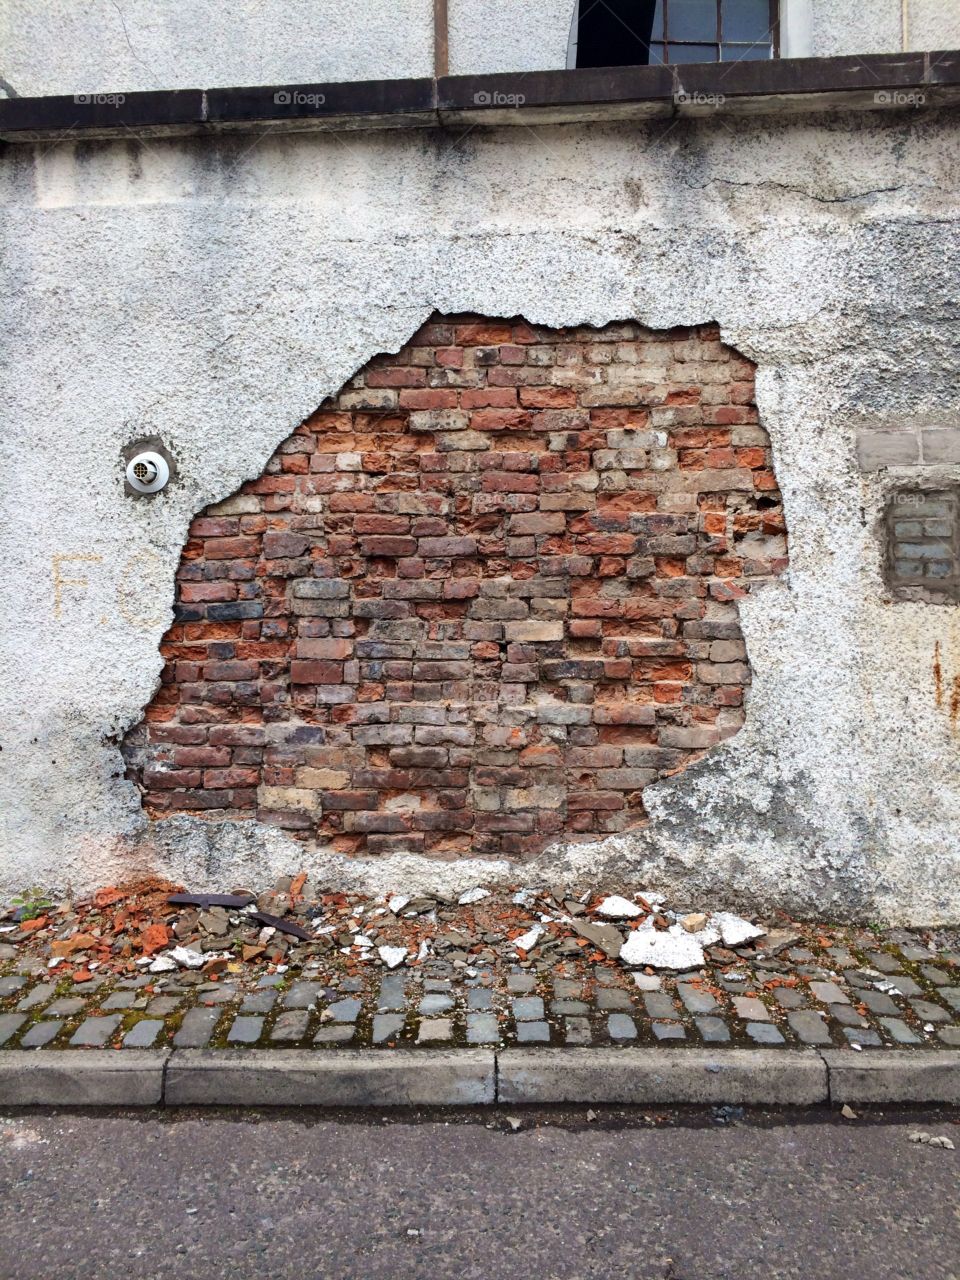 There's Bricks Behind. An old wall in my home town, crumbling to reveal the bricks underneath. 